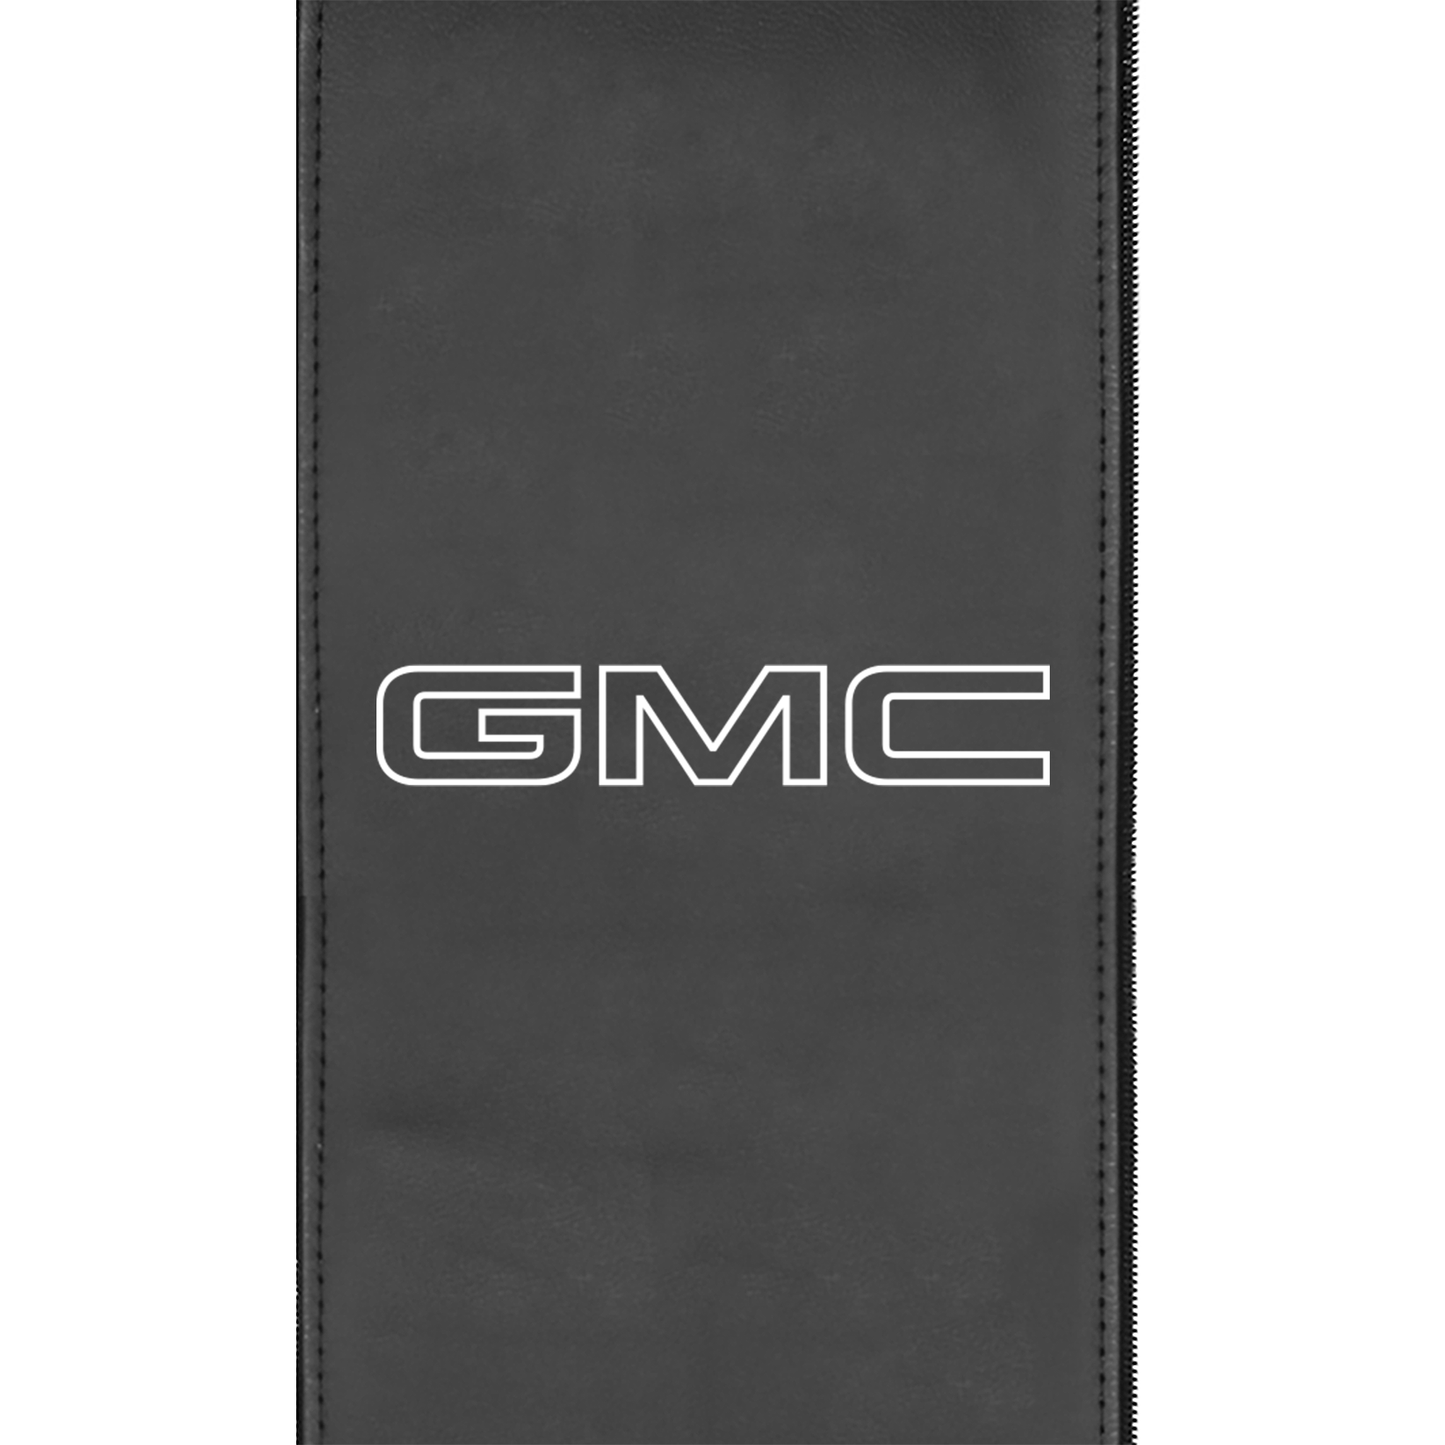 Stealth Power Plus Recliner with GMC Alternate Logo